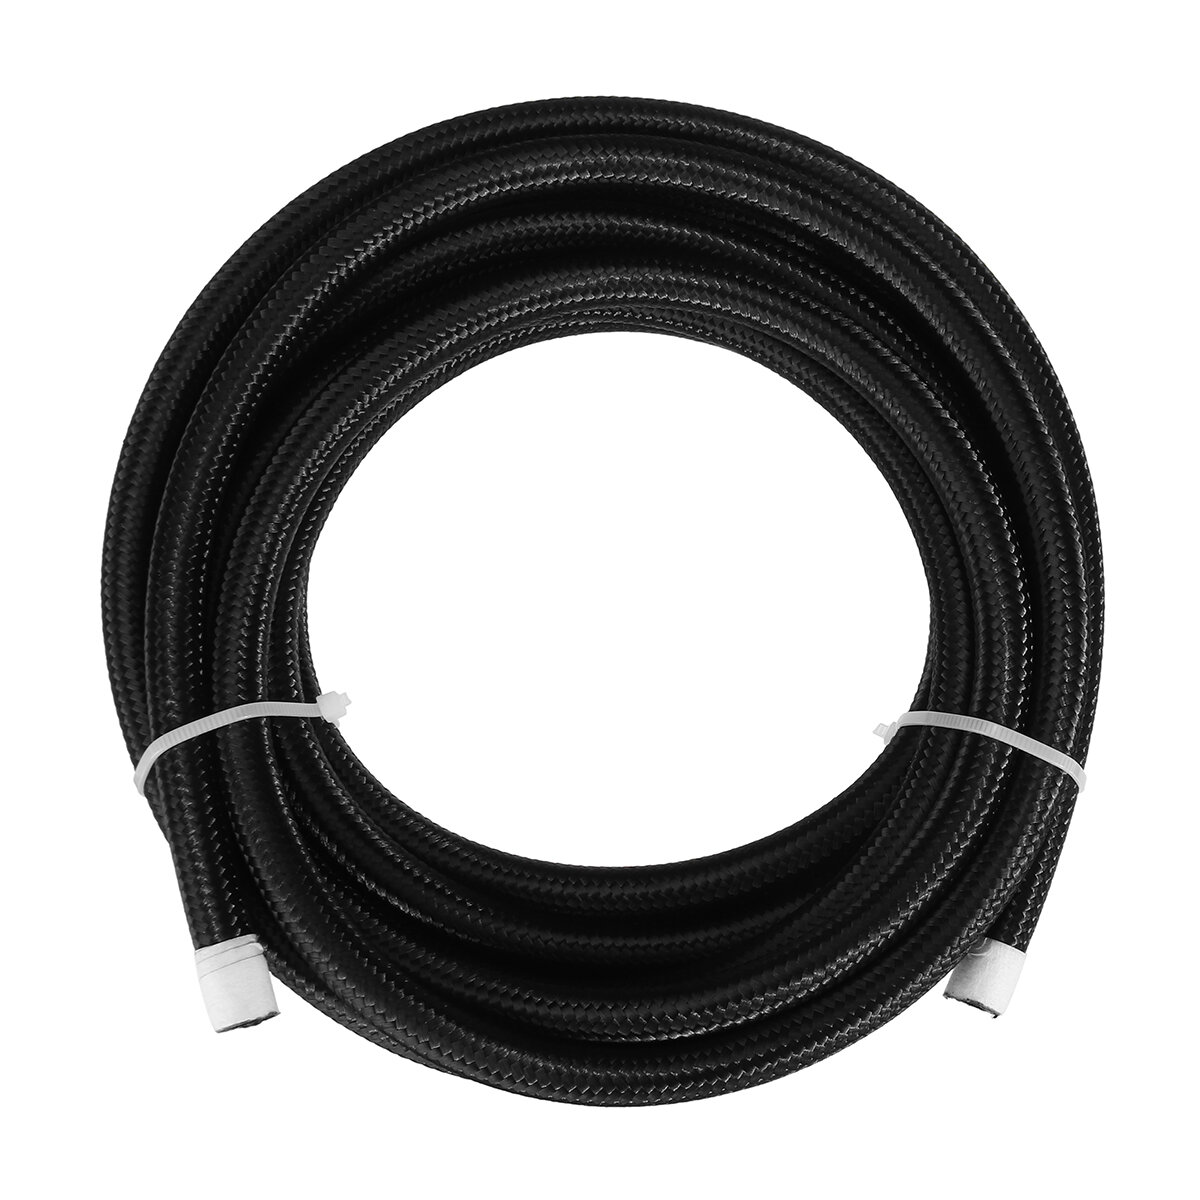 16FT AN4/AN6/AN8 Fuel Hose Oil Pipe Gas Cooler Line Tubing for Car Motorcycle